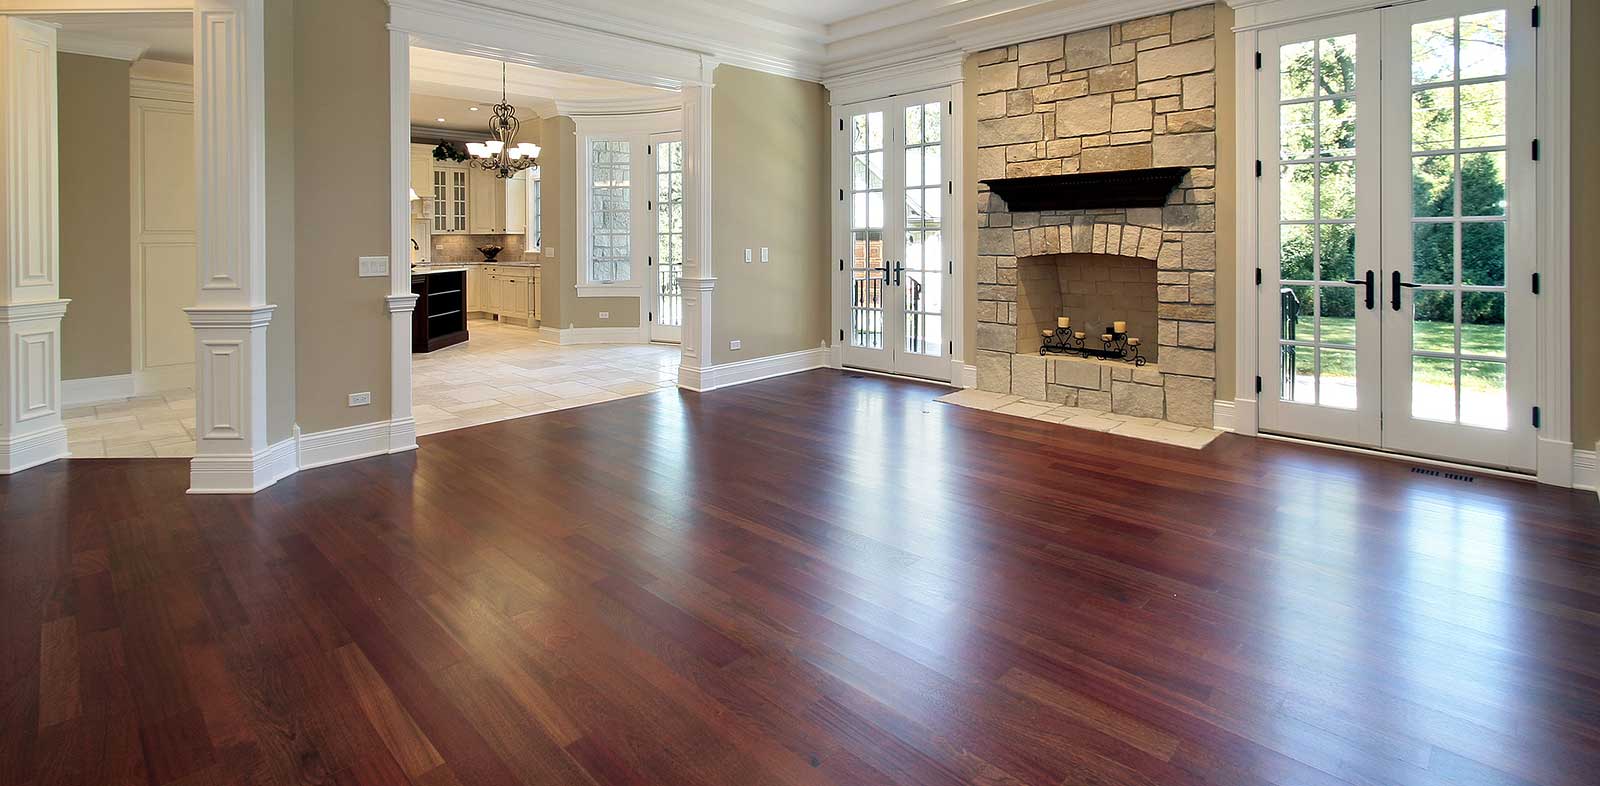 Living in Boston? Here’s why you should consider getting a hardwood floor.